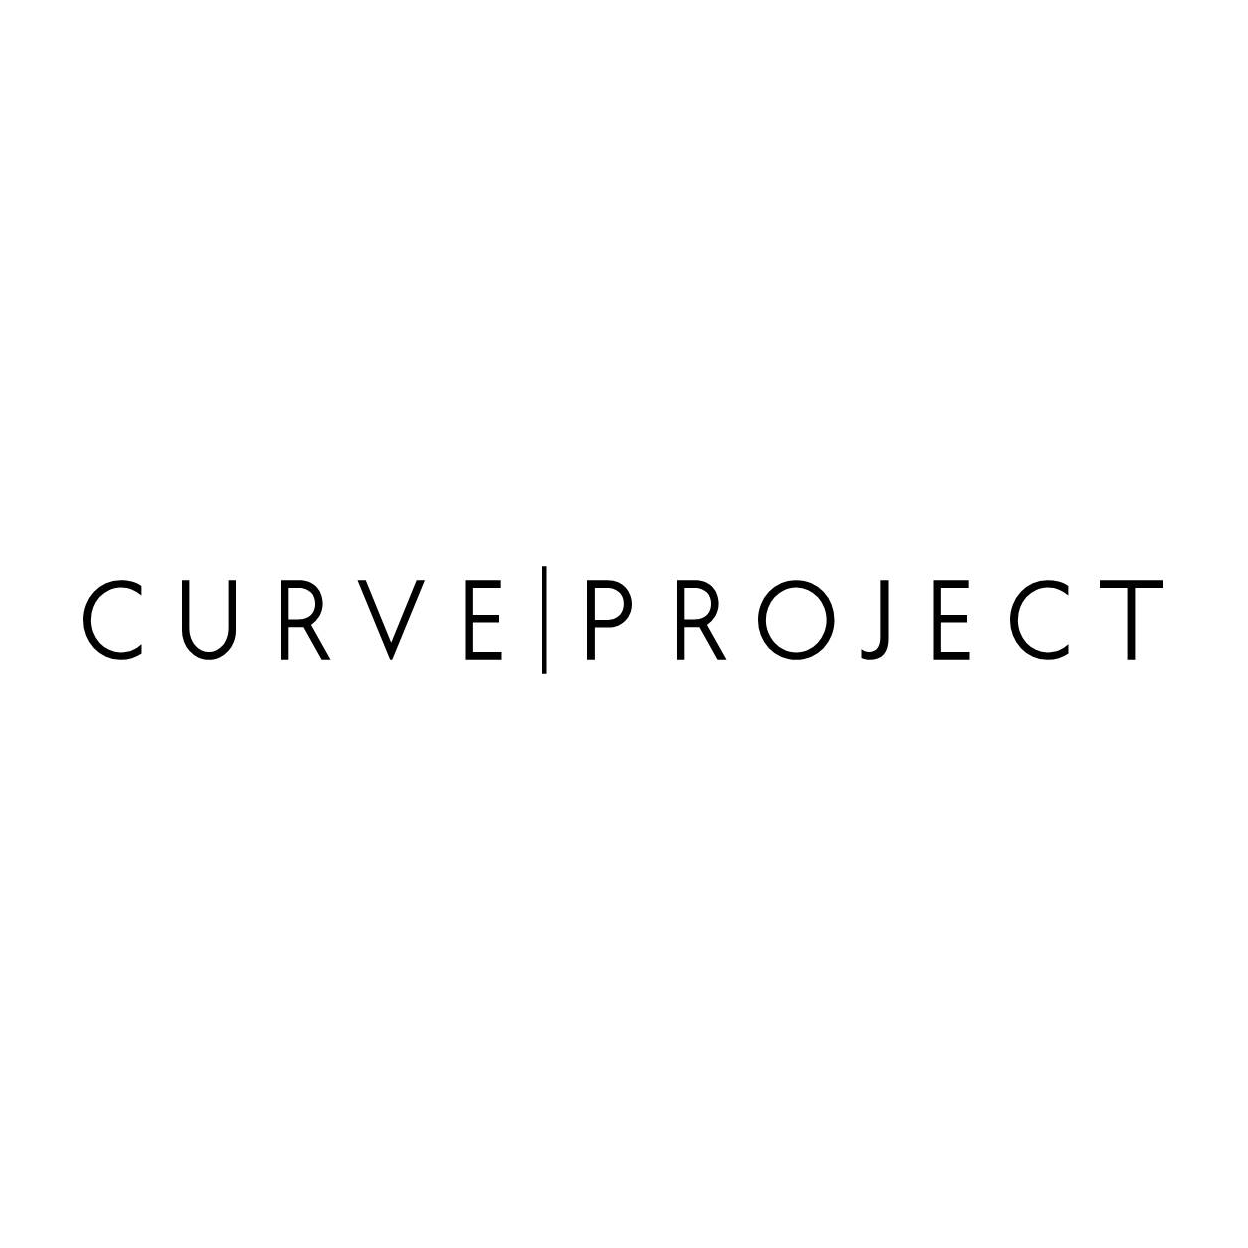 Curve Project